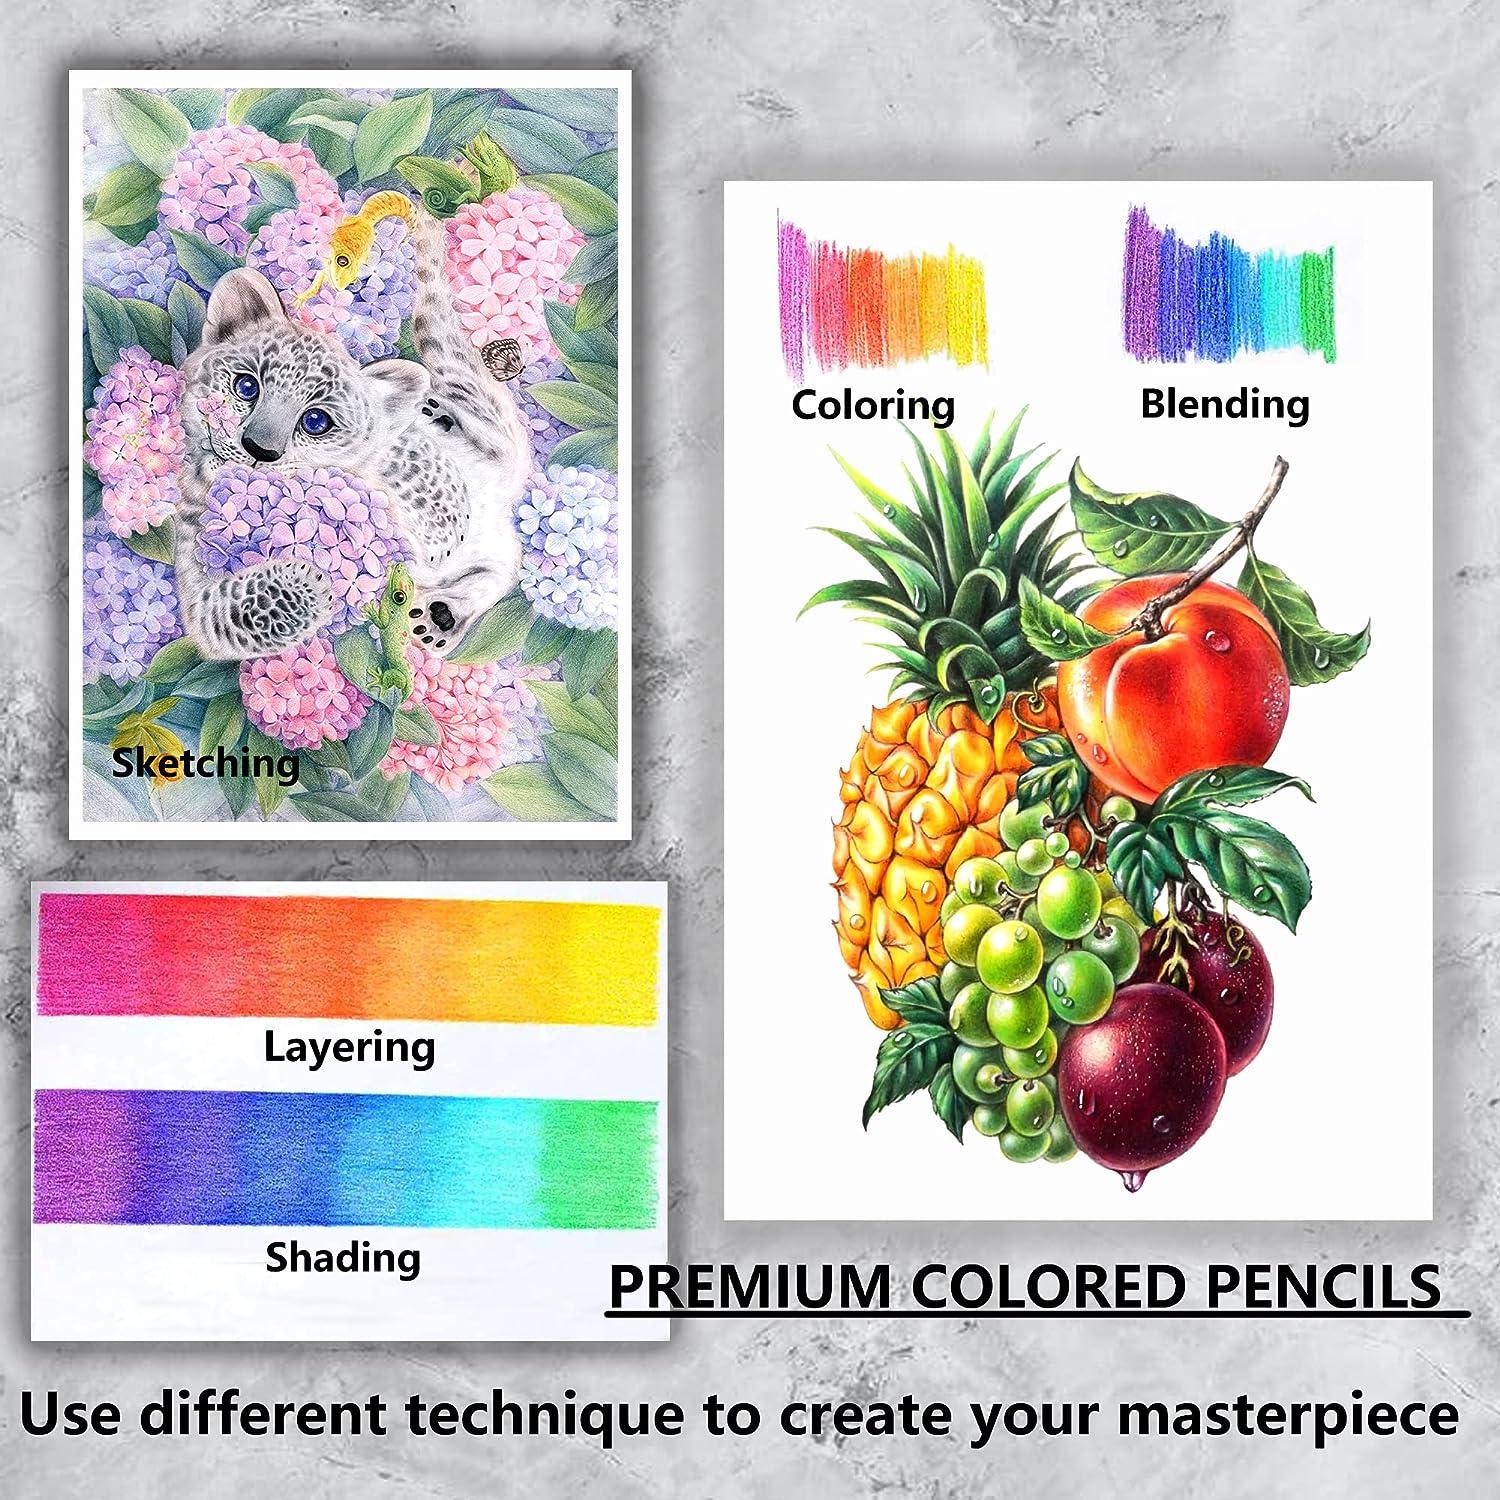 Soft Core Colored Pencils for Adult Coloring Books - Easy Blending and  Shading